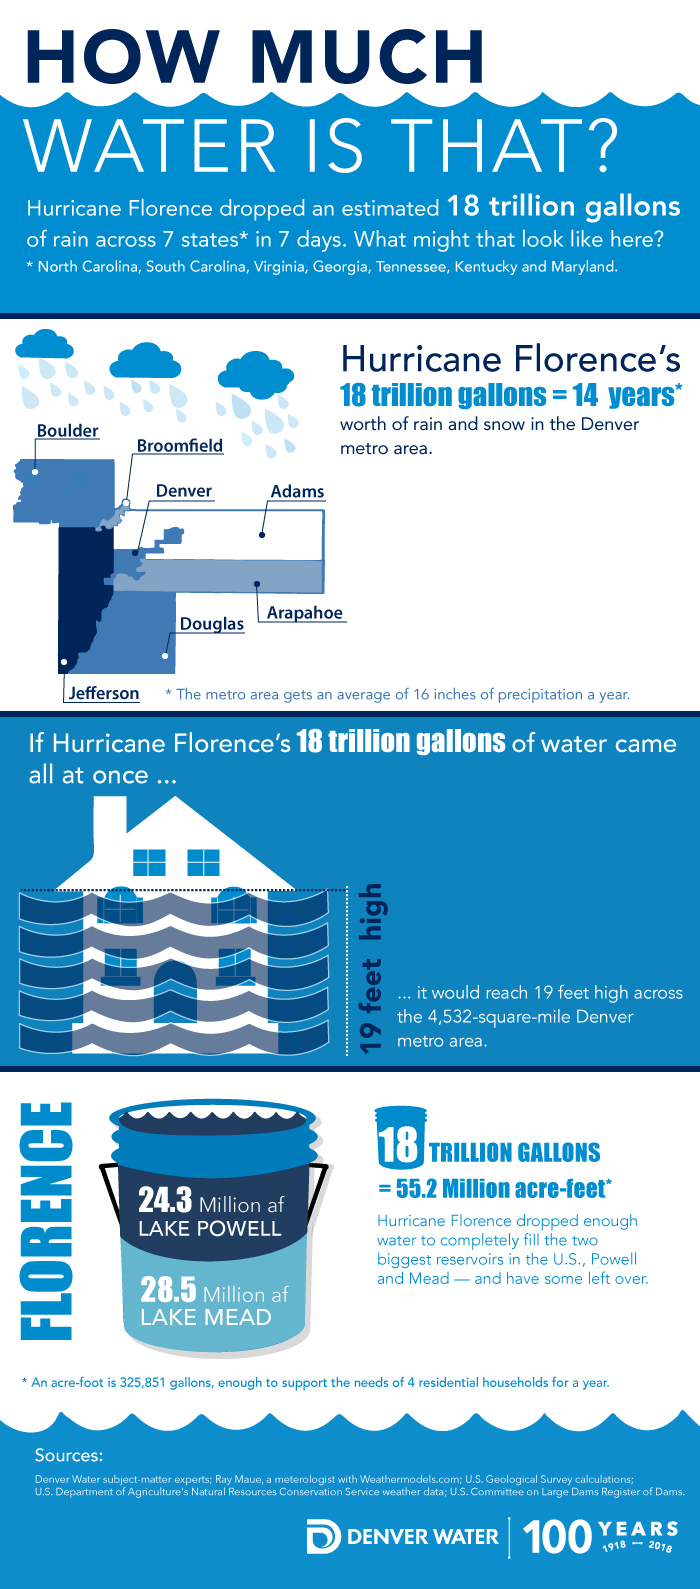 Hurricane Florence graphic showing the impact of 18 trillion gallons of water, by Jamie Reddig.